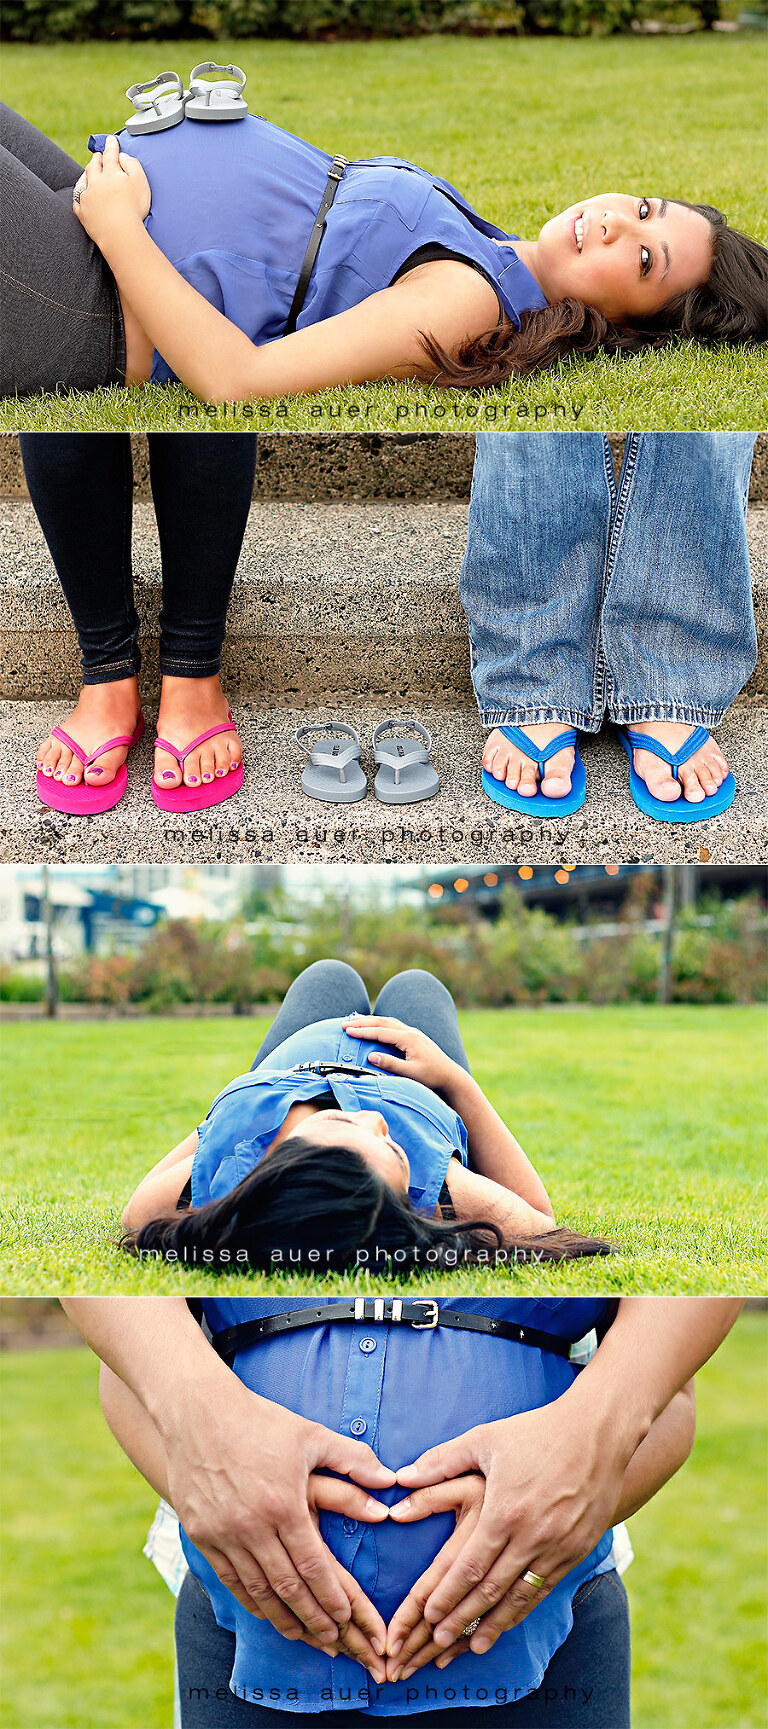 maternity session / Melissa Auer Photography 2013